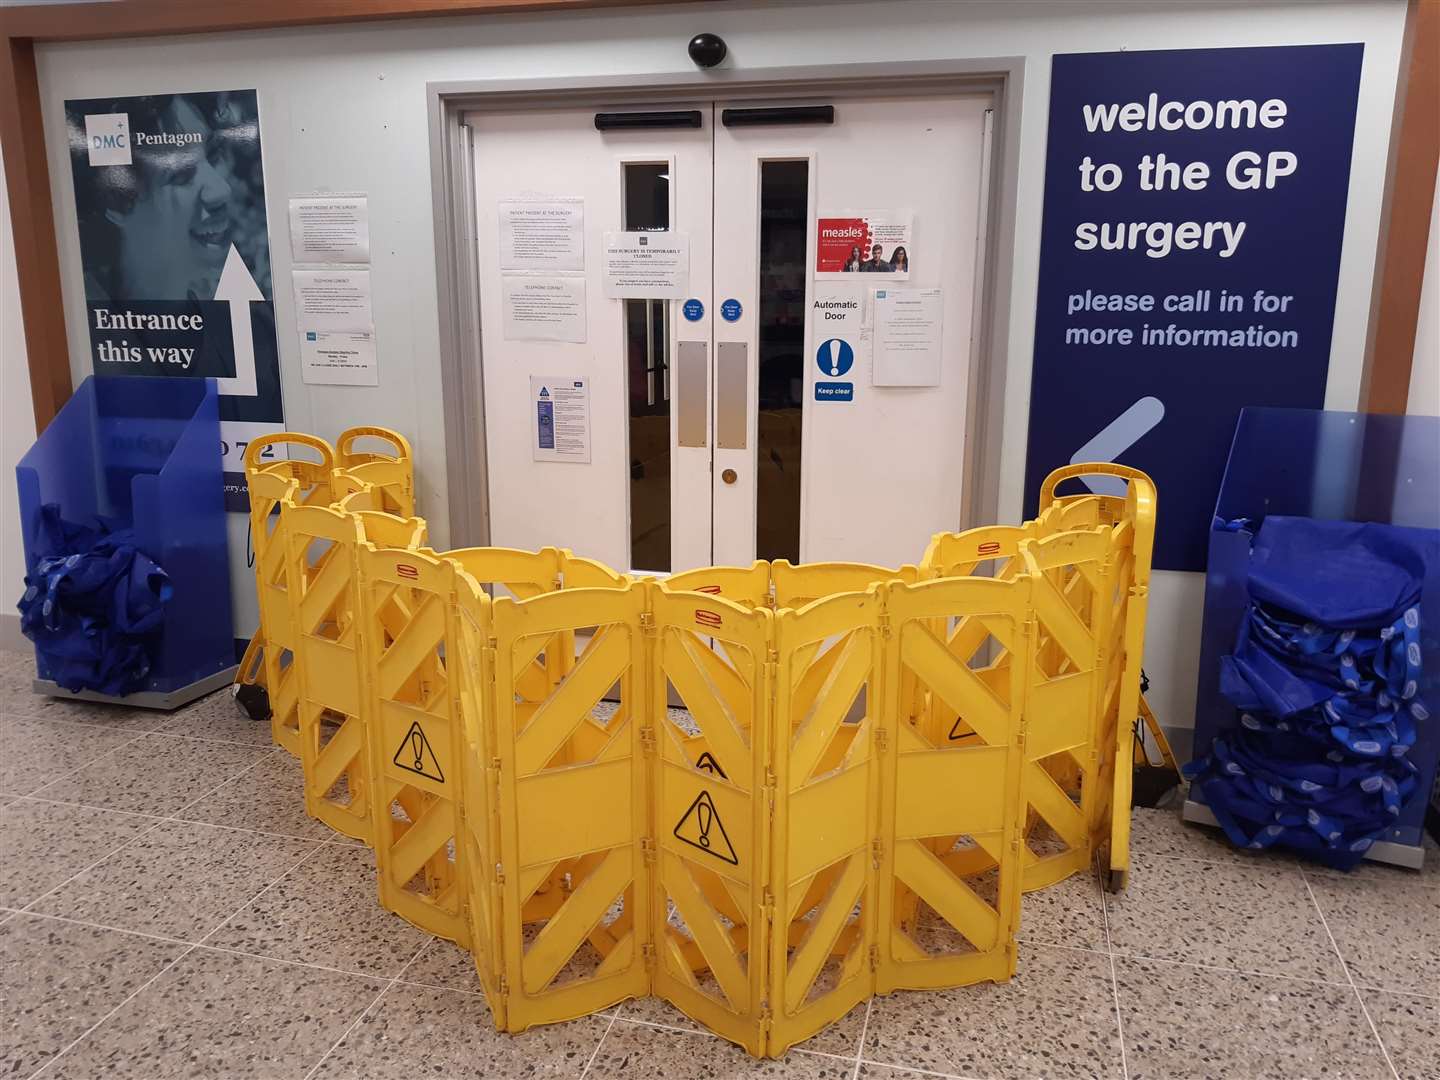 The blocked-off entrance to DMC healthcare inside Boots at the Pentagon shopping centre, Chatham